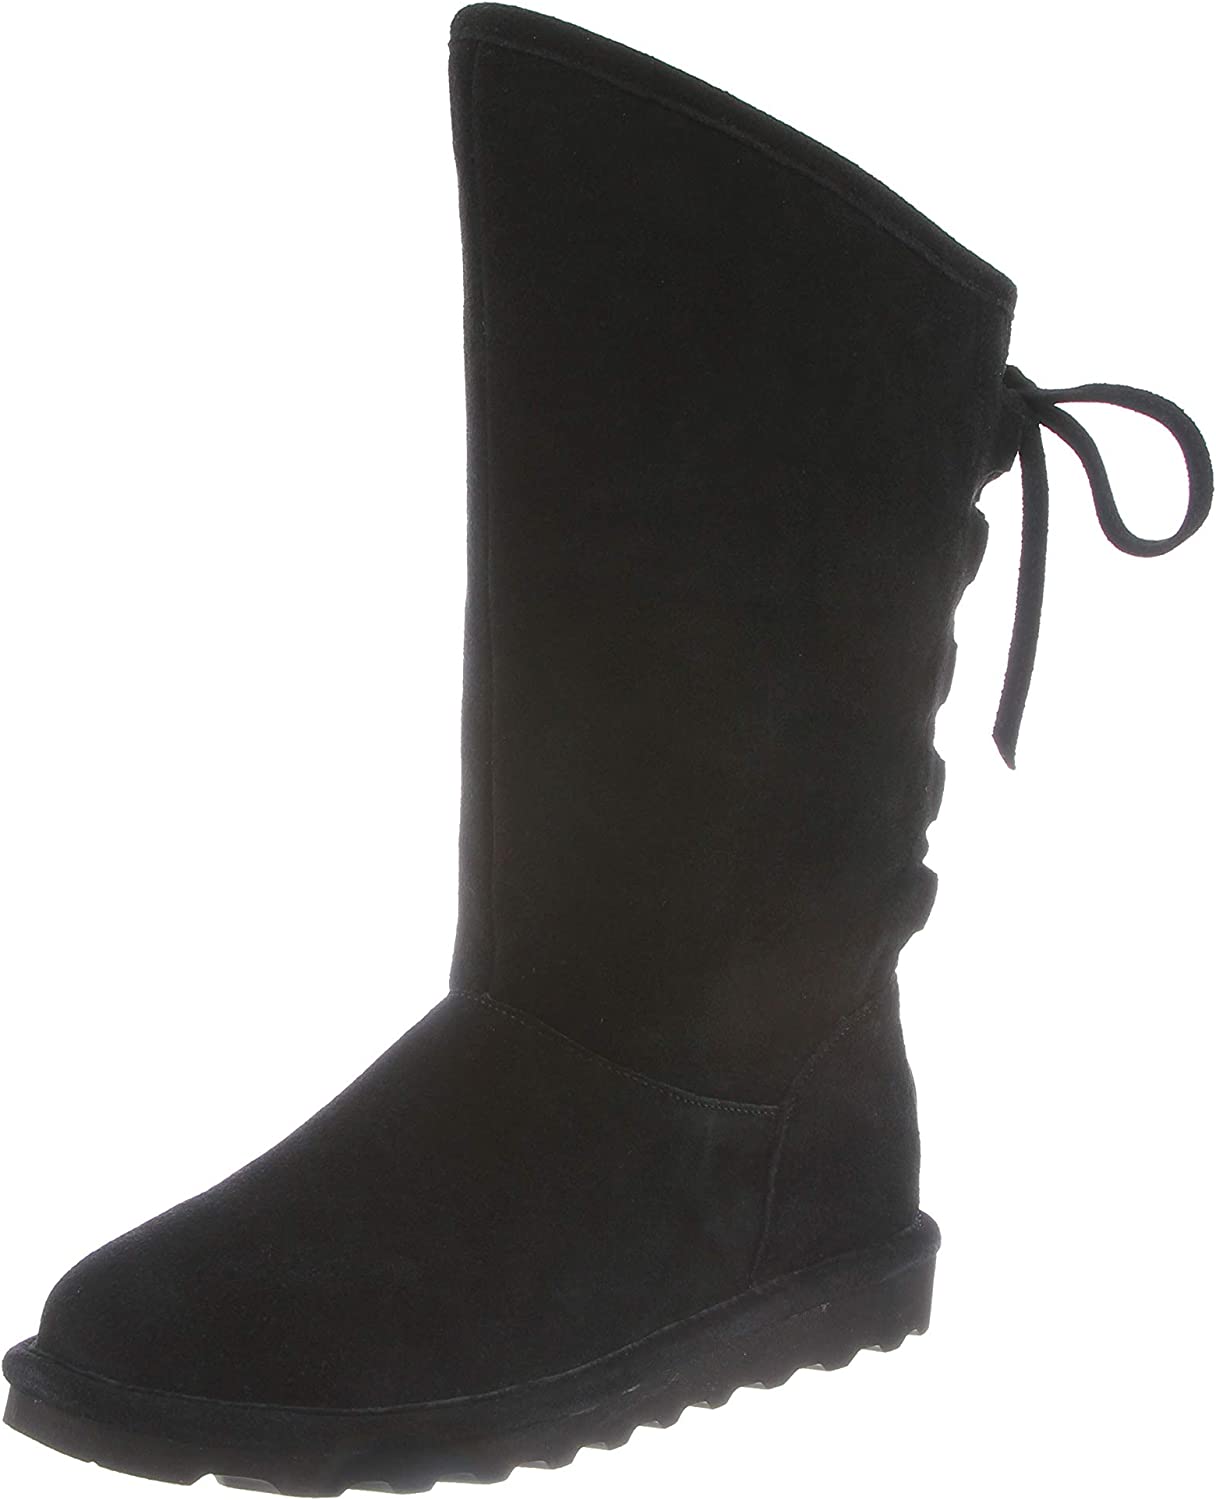 BEARPAW Womens Phylly Tall Suede Boots - Black - 7